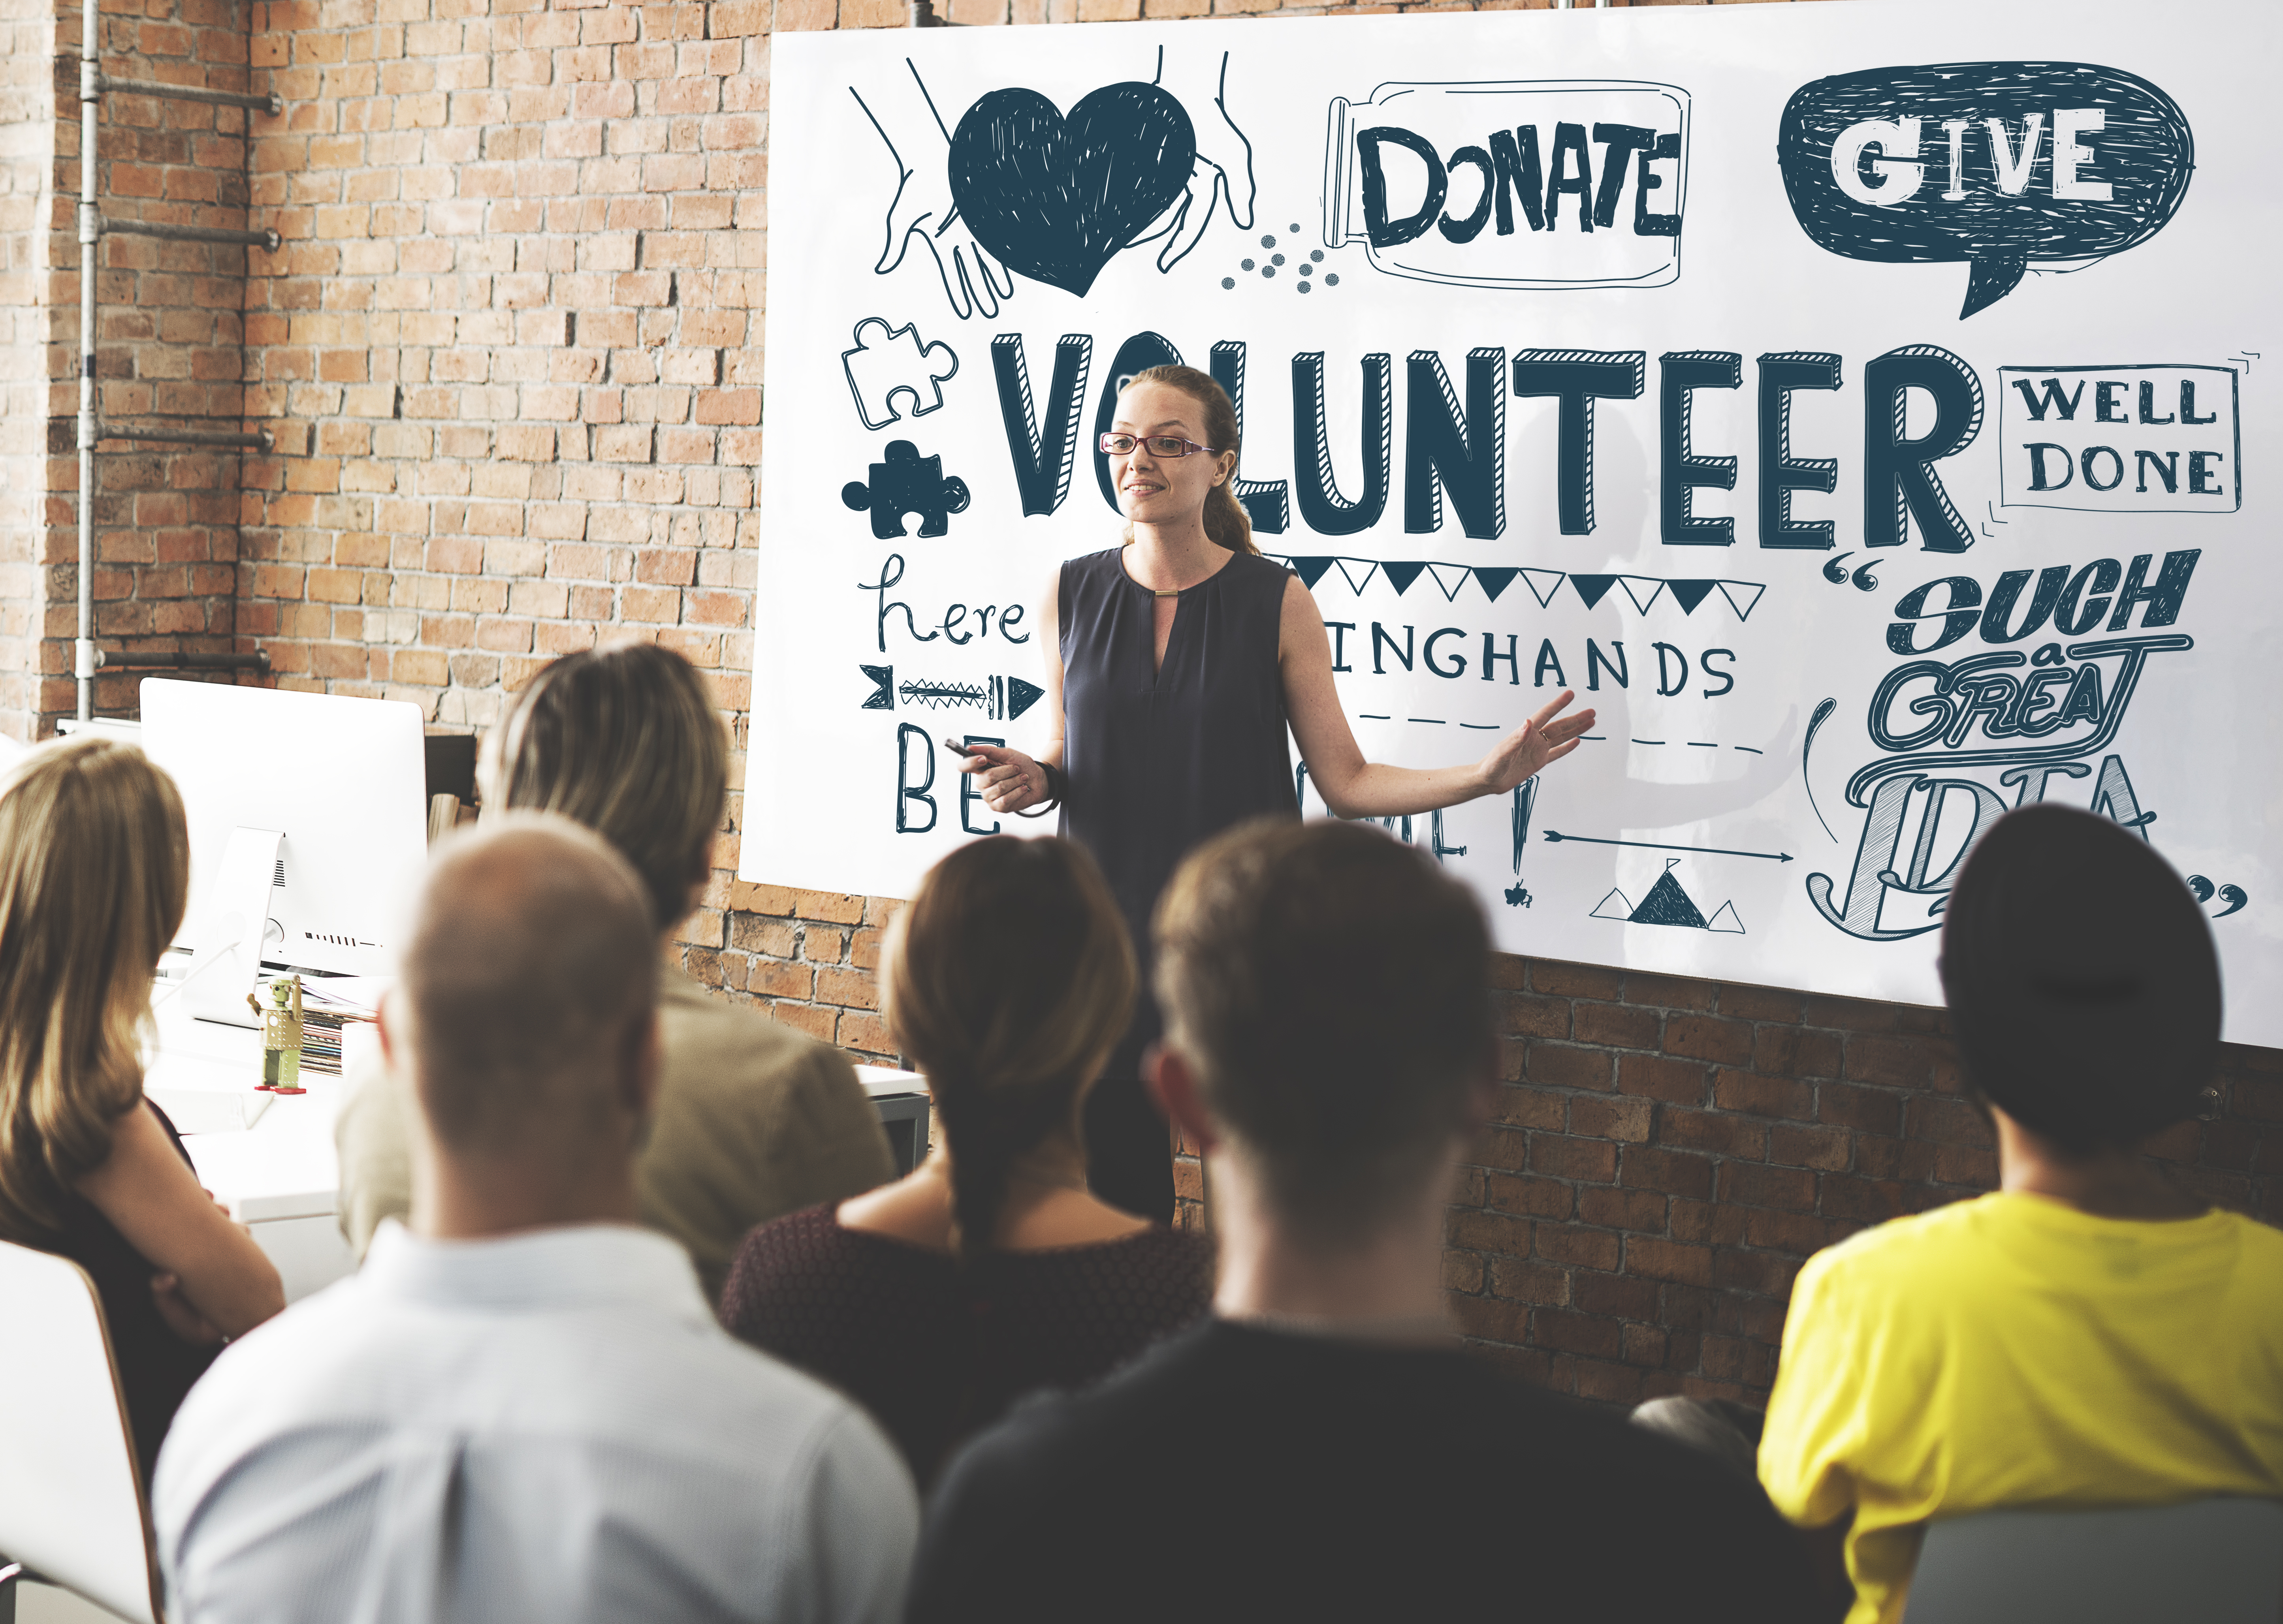 Giving back: The small business benefits of being charitable